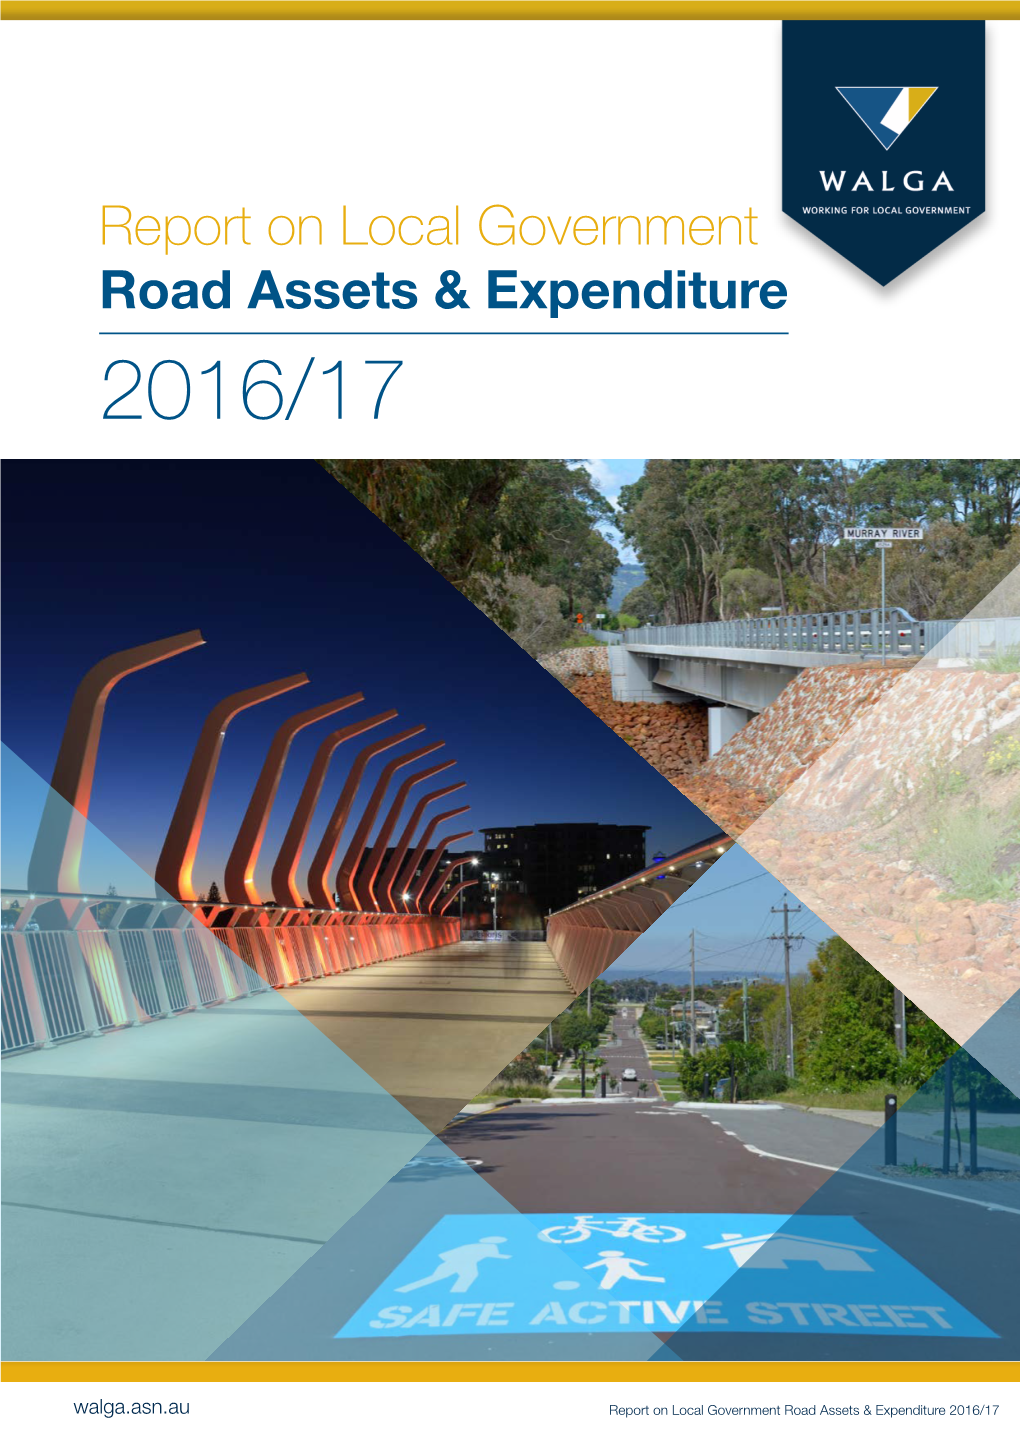 Report on Local Government Road Assets & Expenditure 2016/17